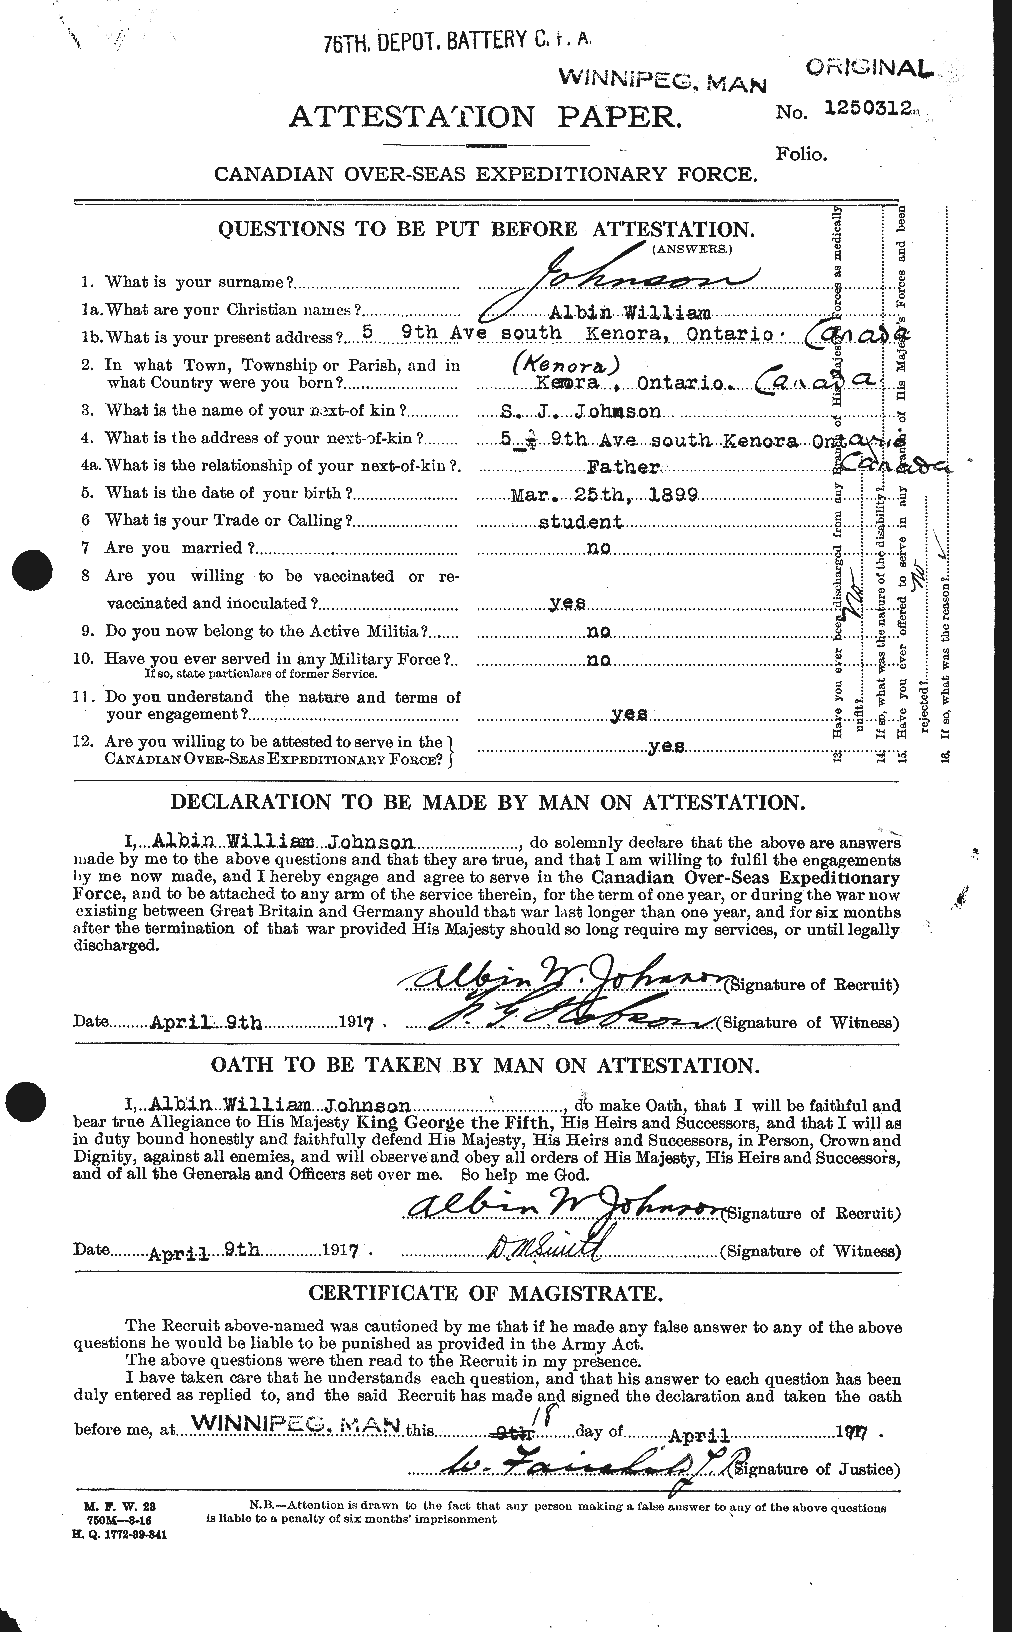 Personnel Records of the First World War - CEF 421143a